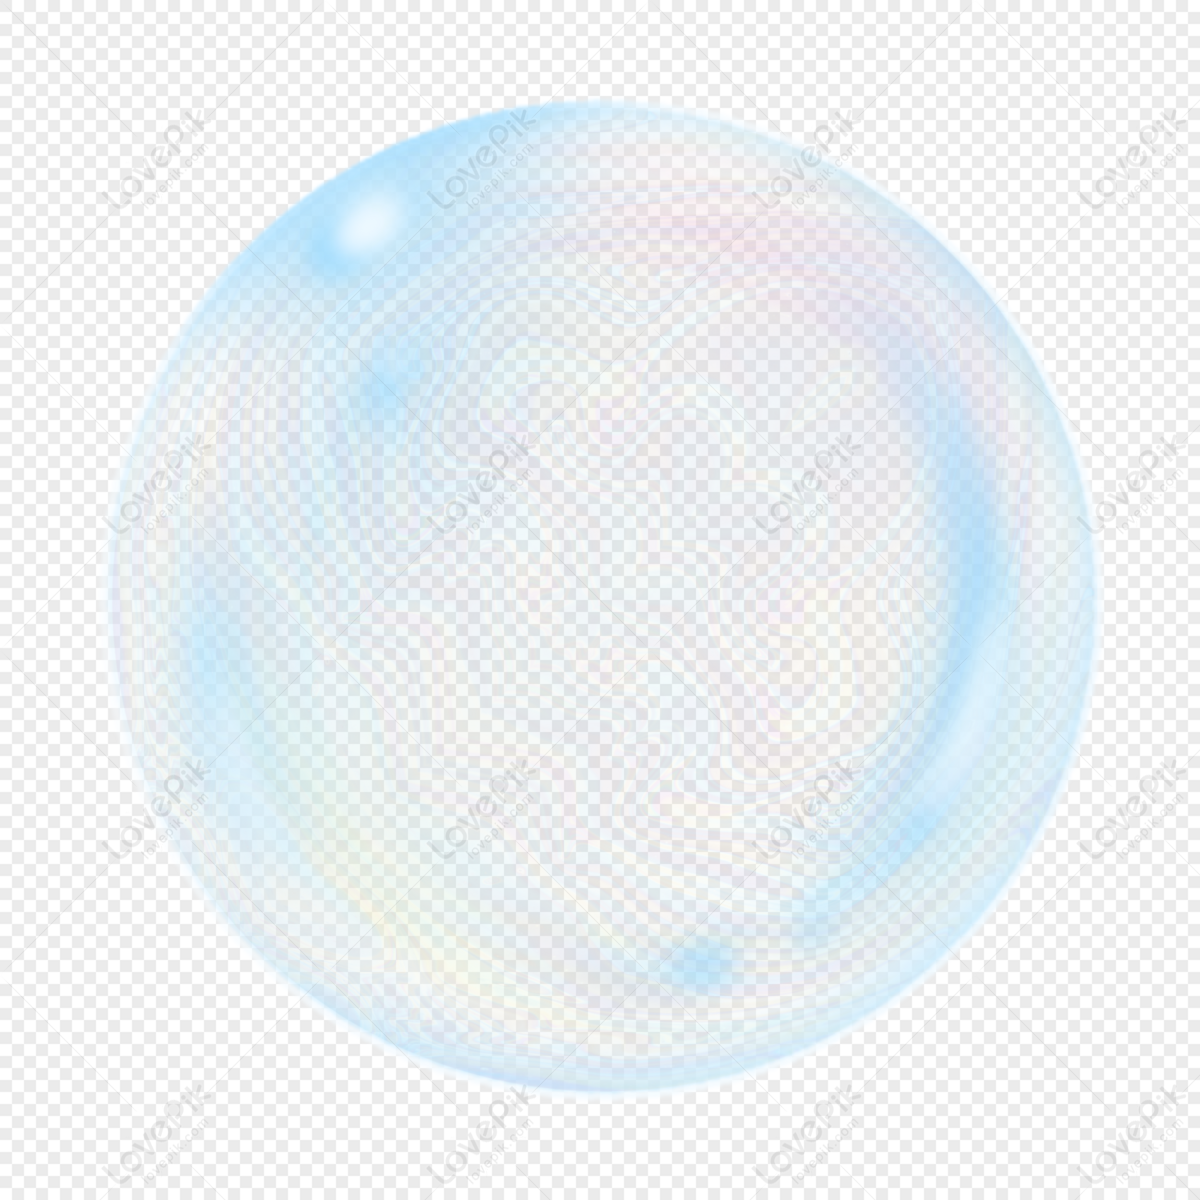 Bubble PNG Transparent Background And Clipart Image For Free Download -  Lovepik | 400383760